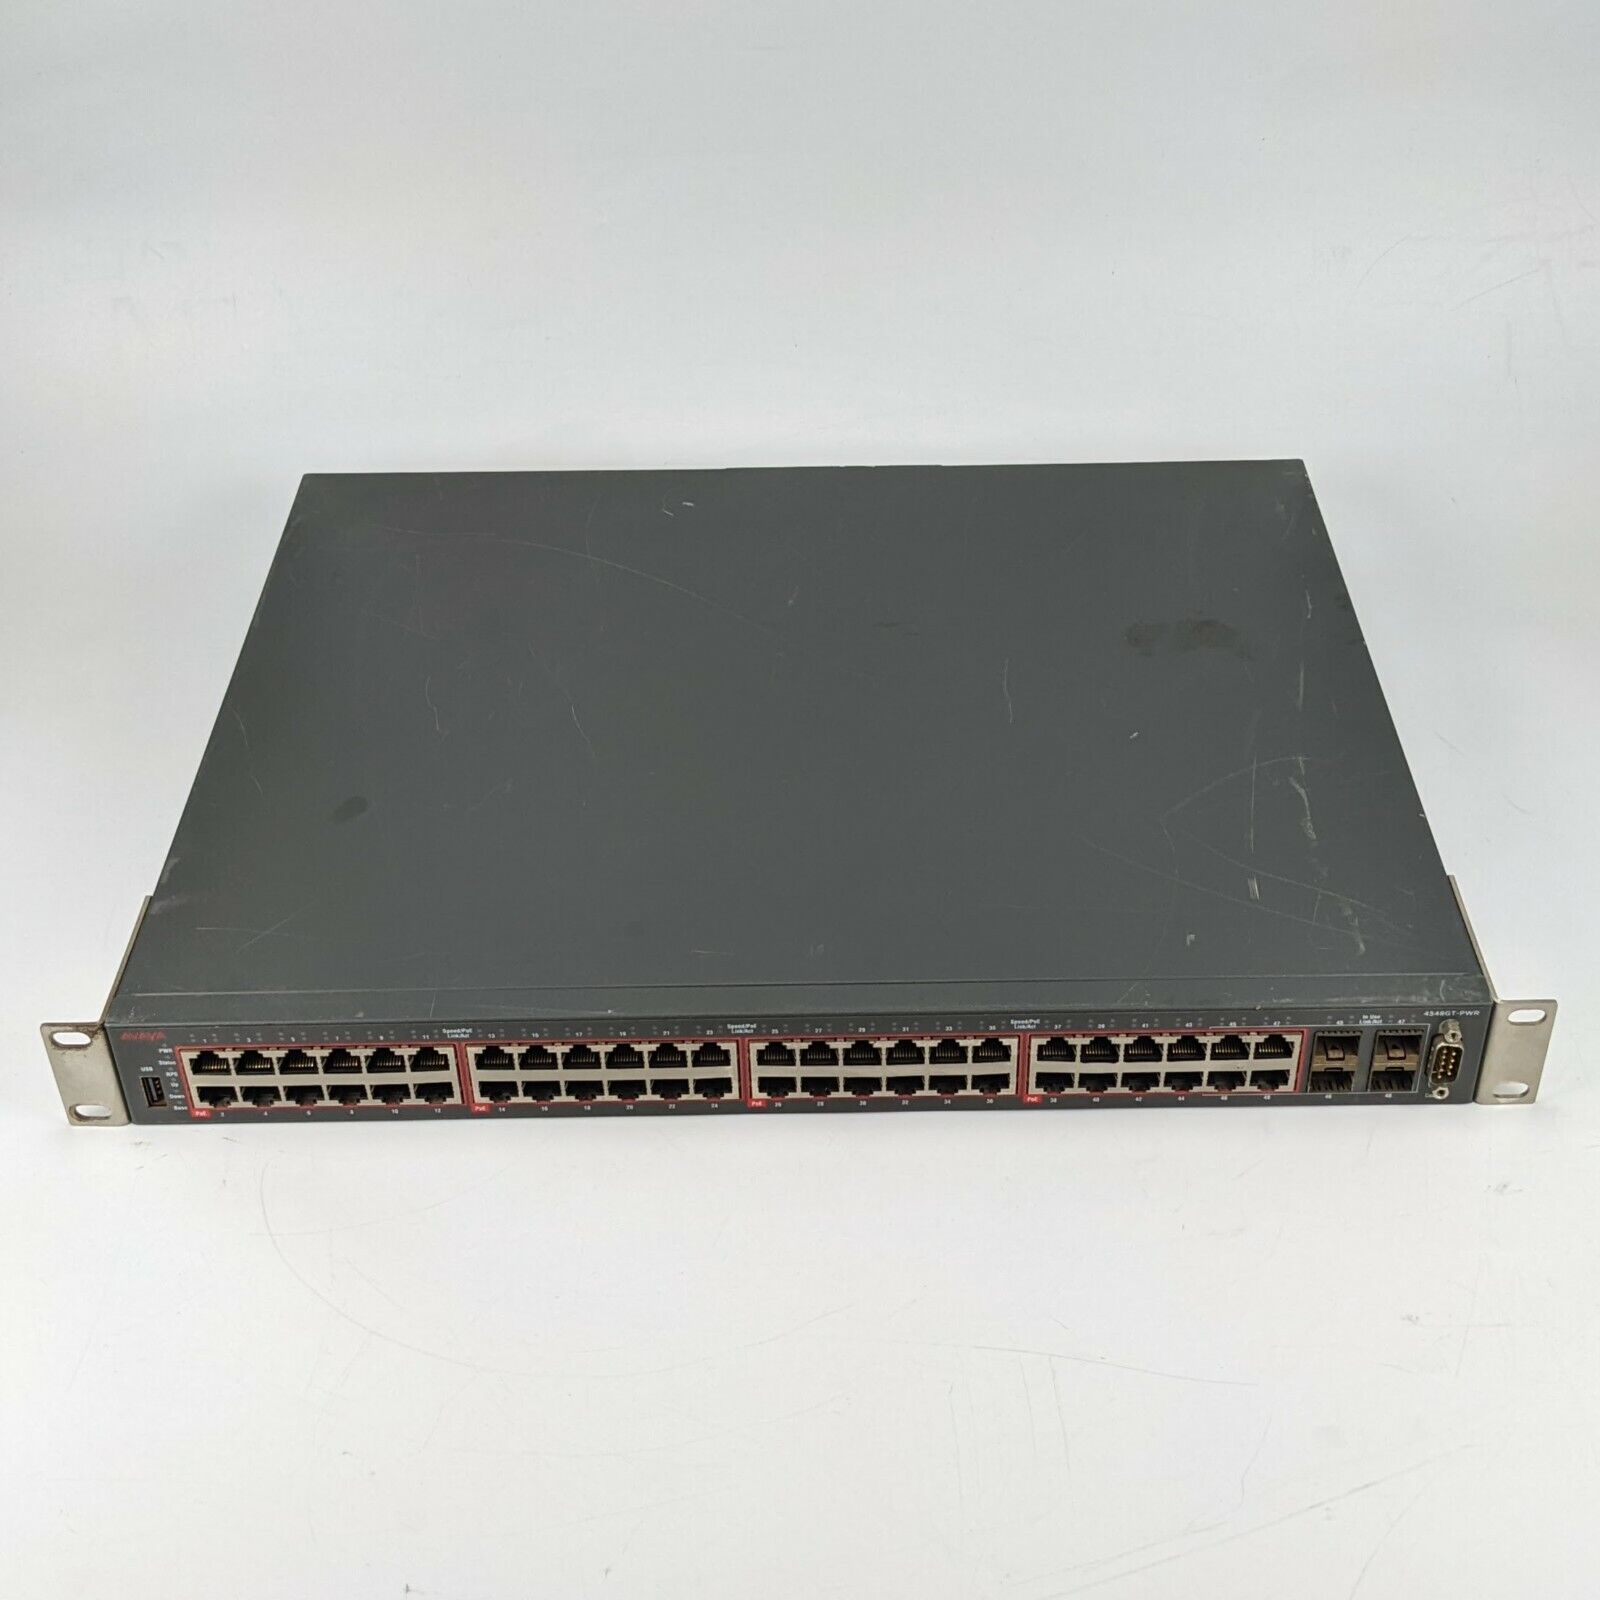 AVAYA 4548GT-PWR 48-Port POE Ethernet Routing Switch - TESTED - 2